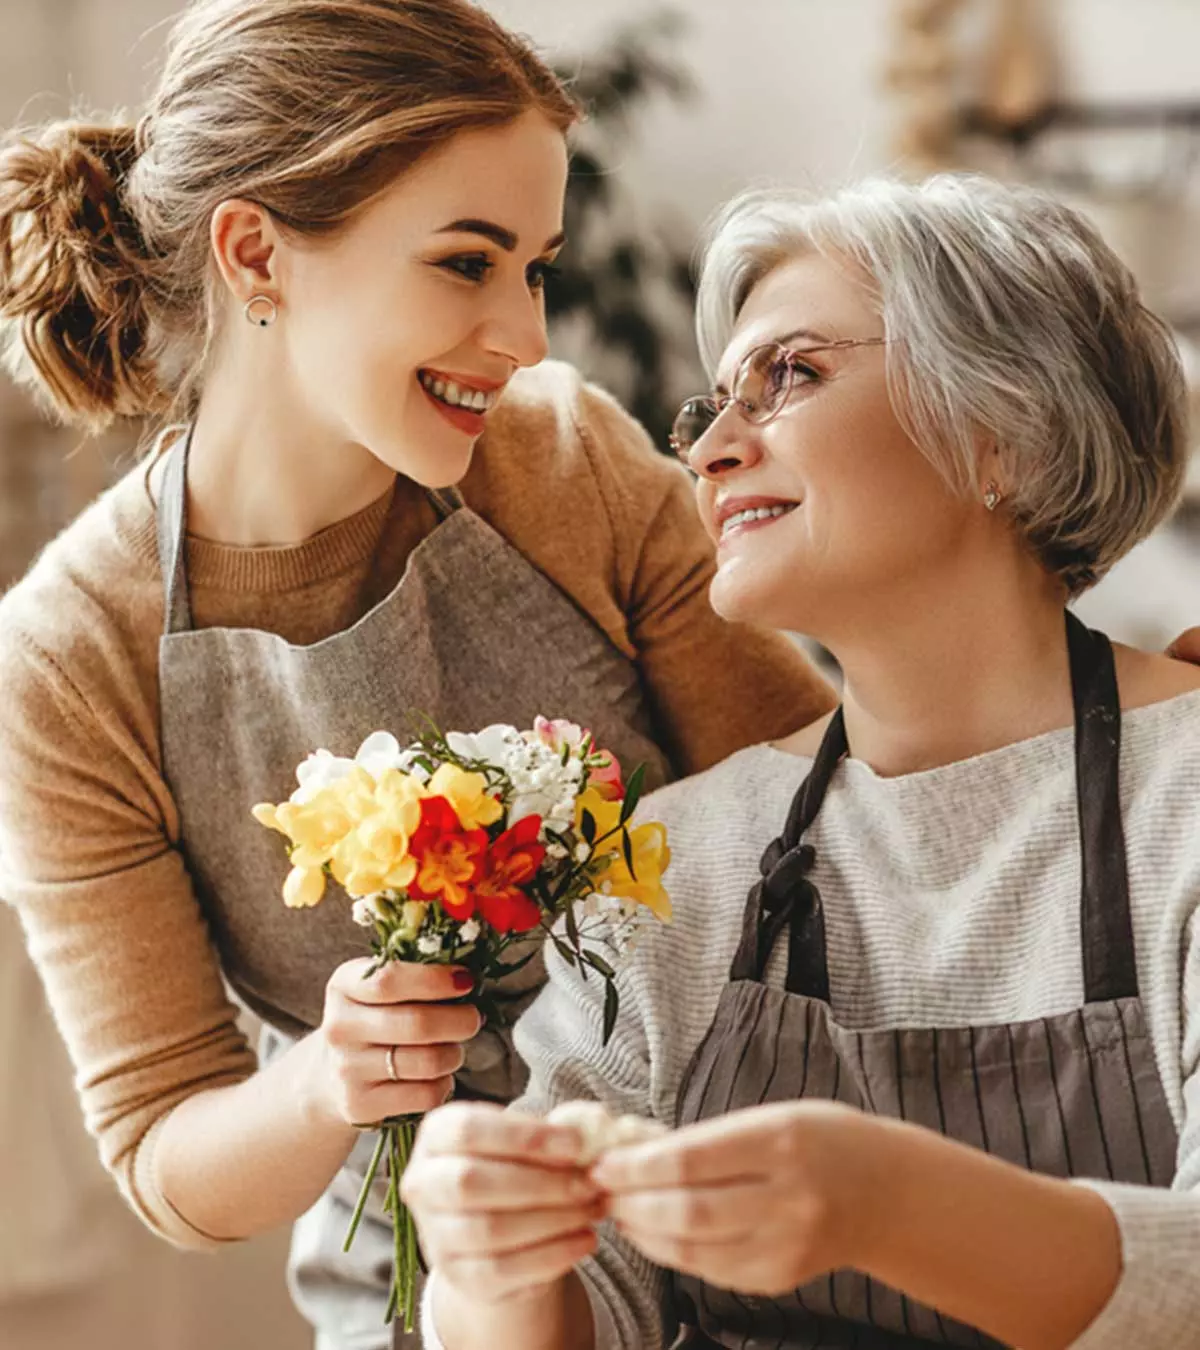 Send a thank you message to your mother-in-law to let her know what she means to you.